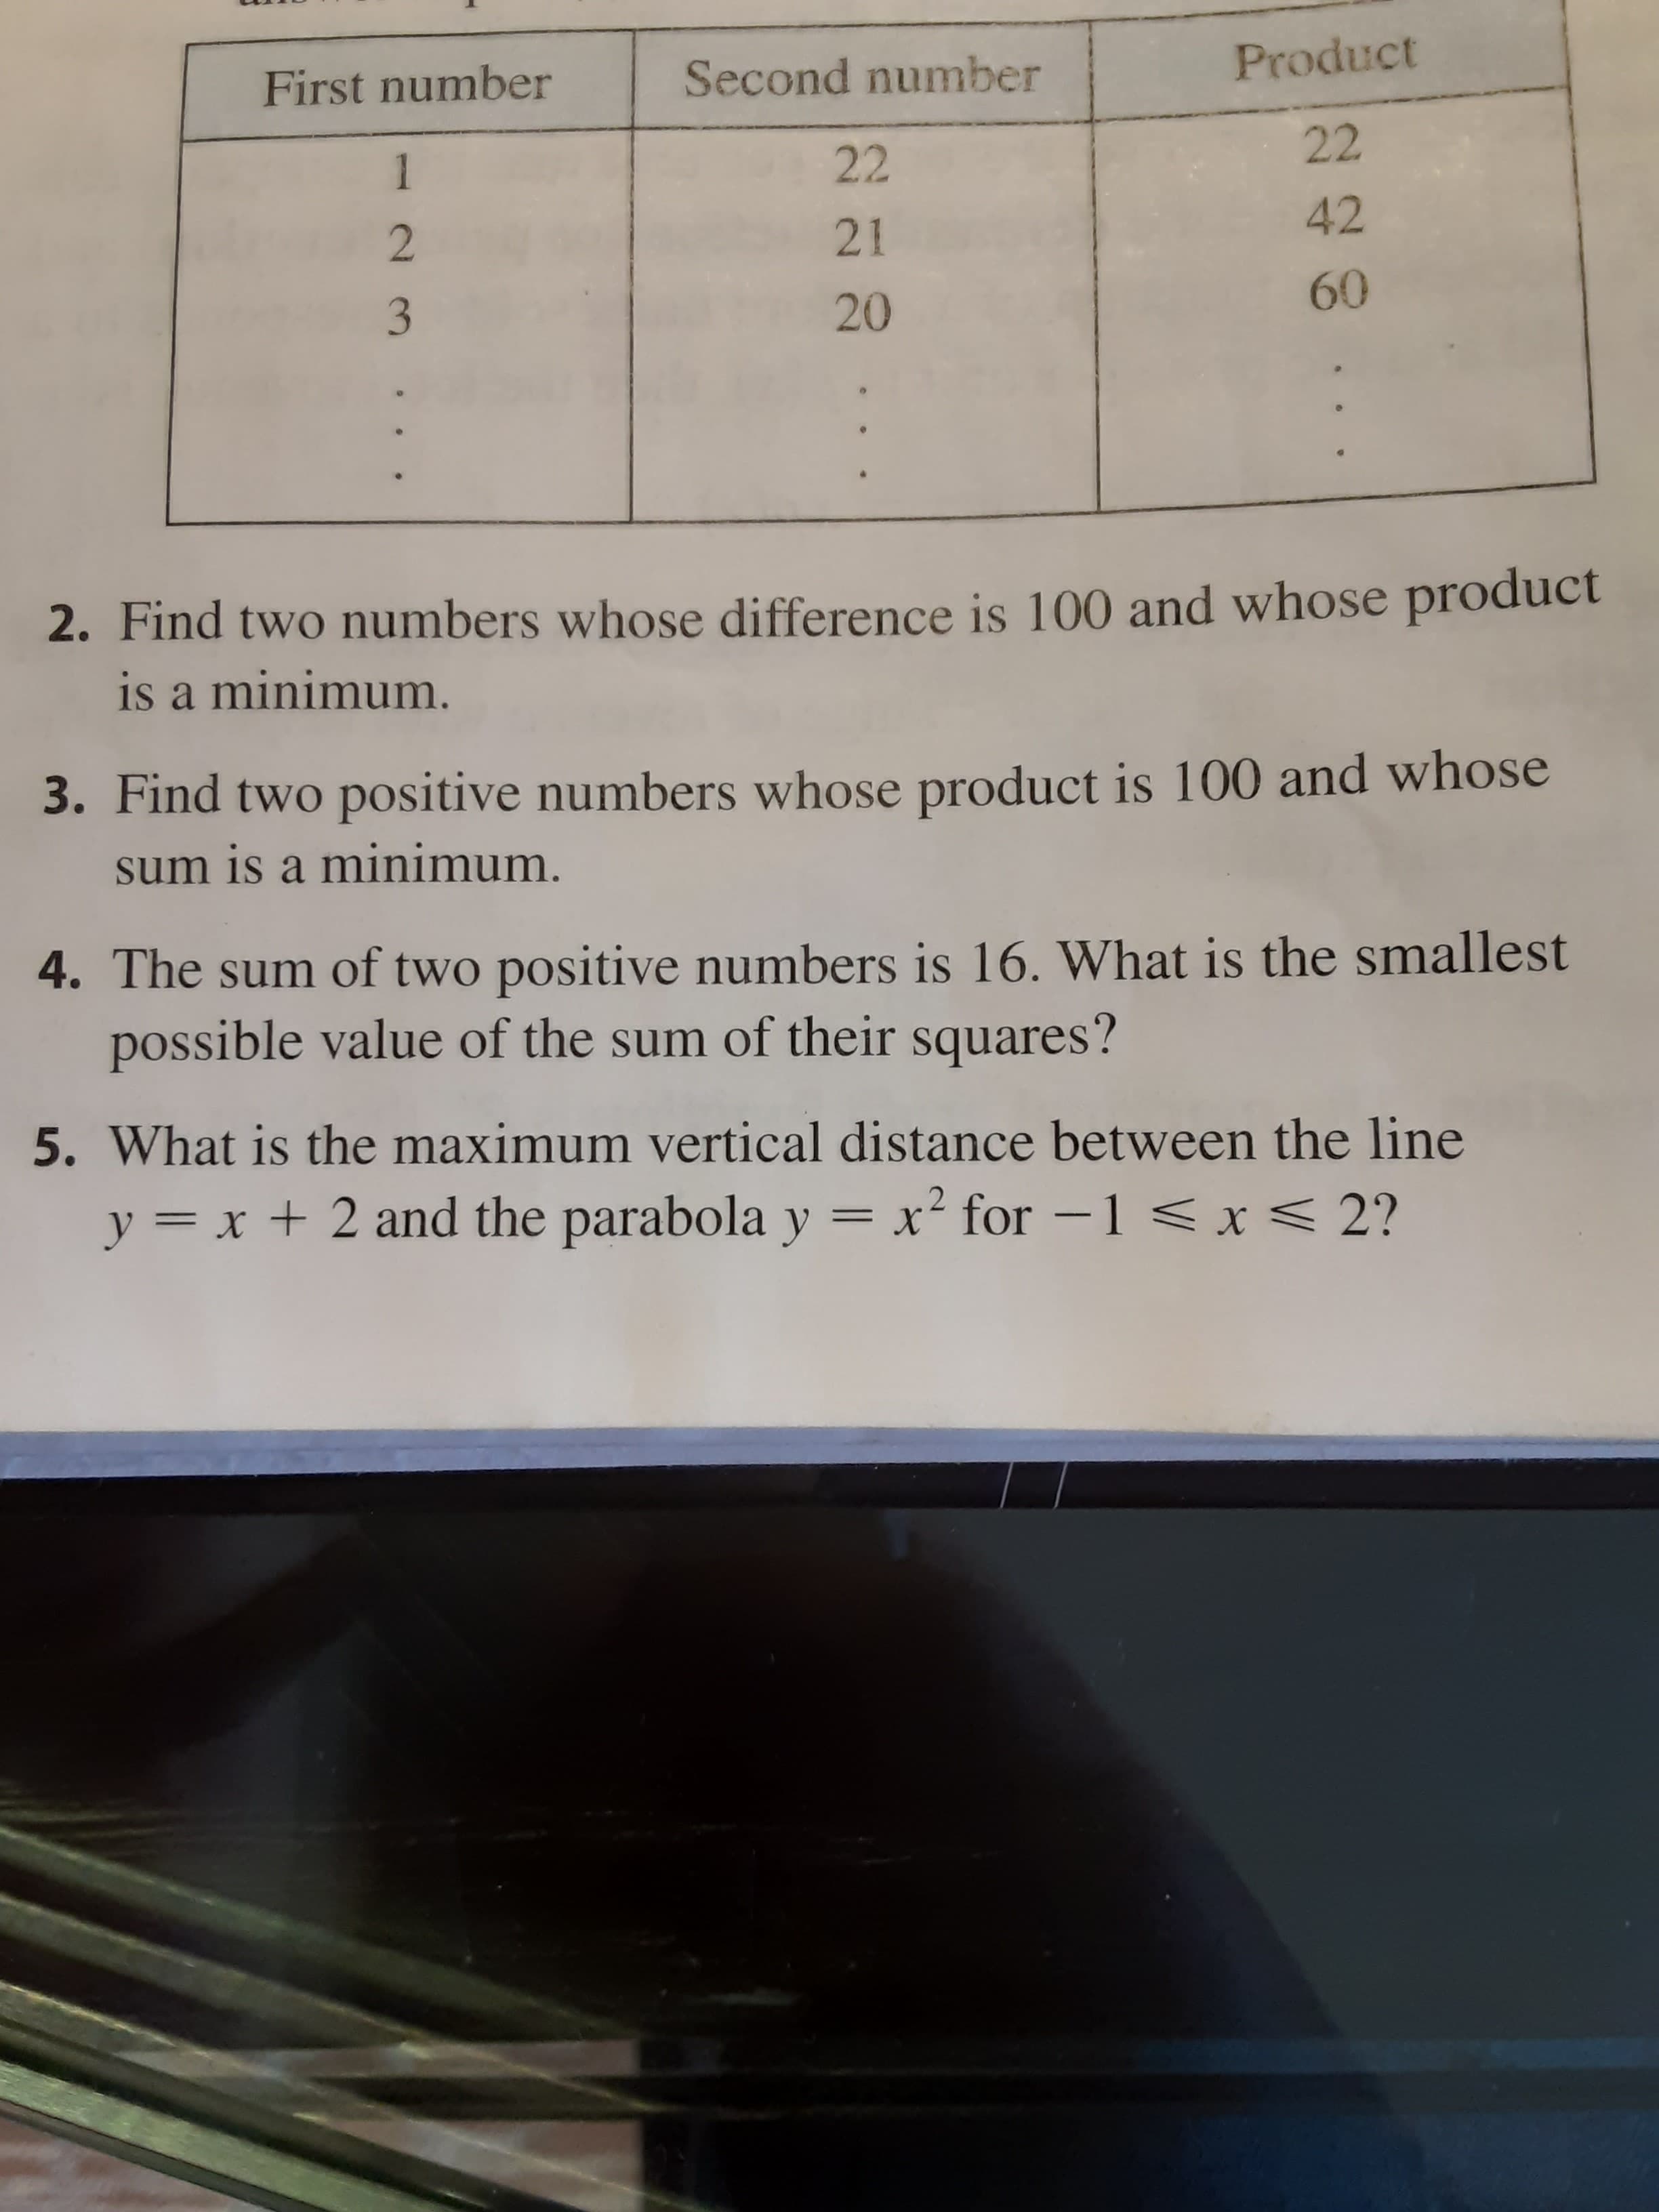 2. Find two numbers whose difference is 100 and whose product
is a minimum.
